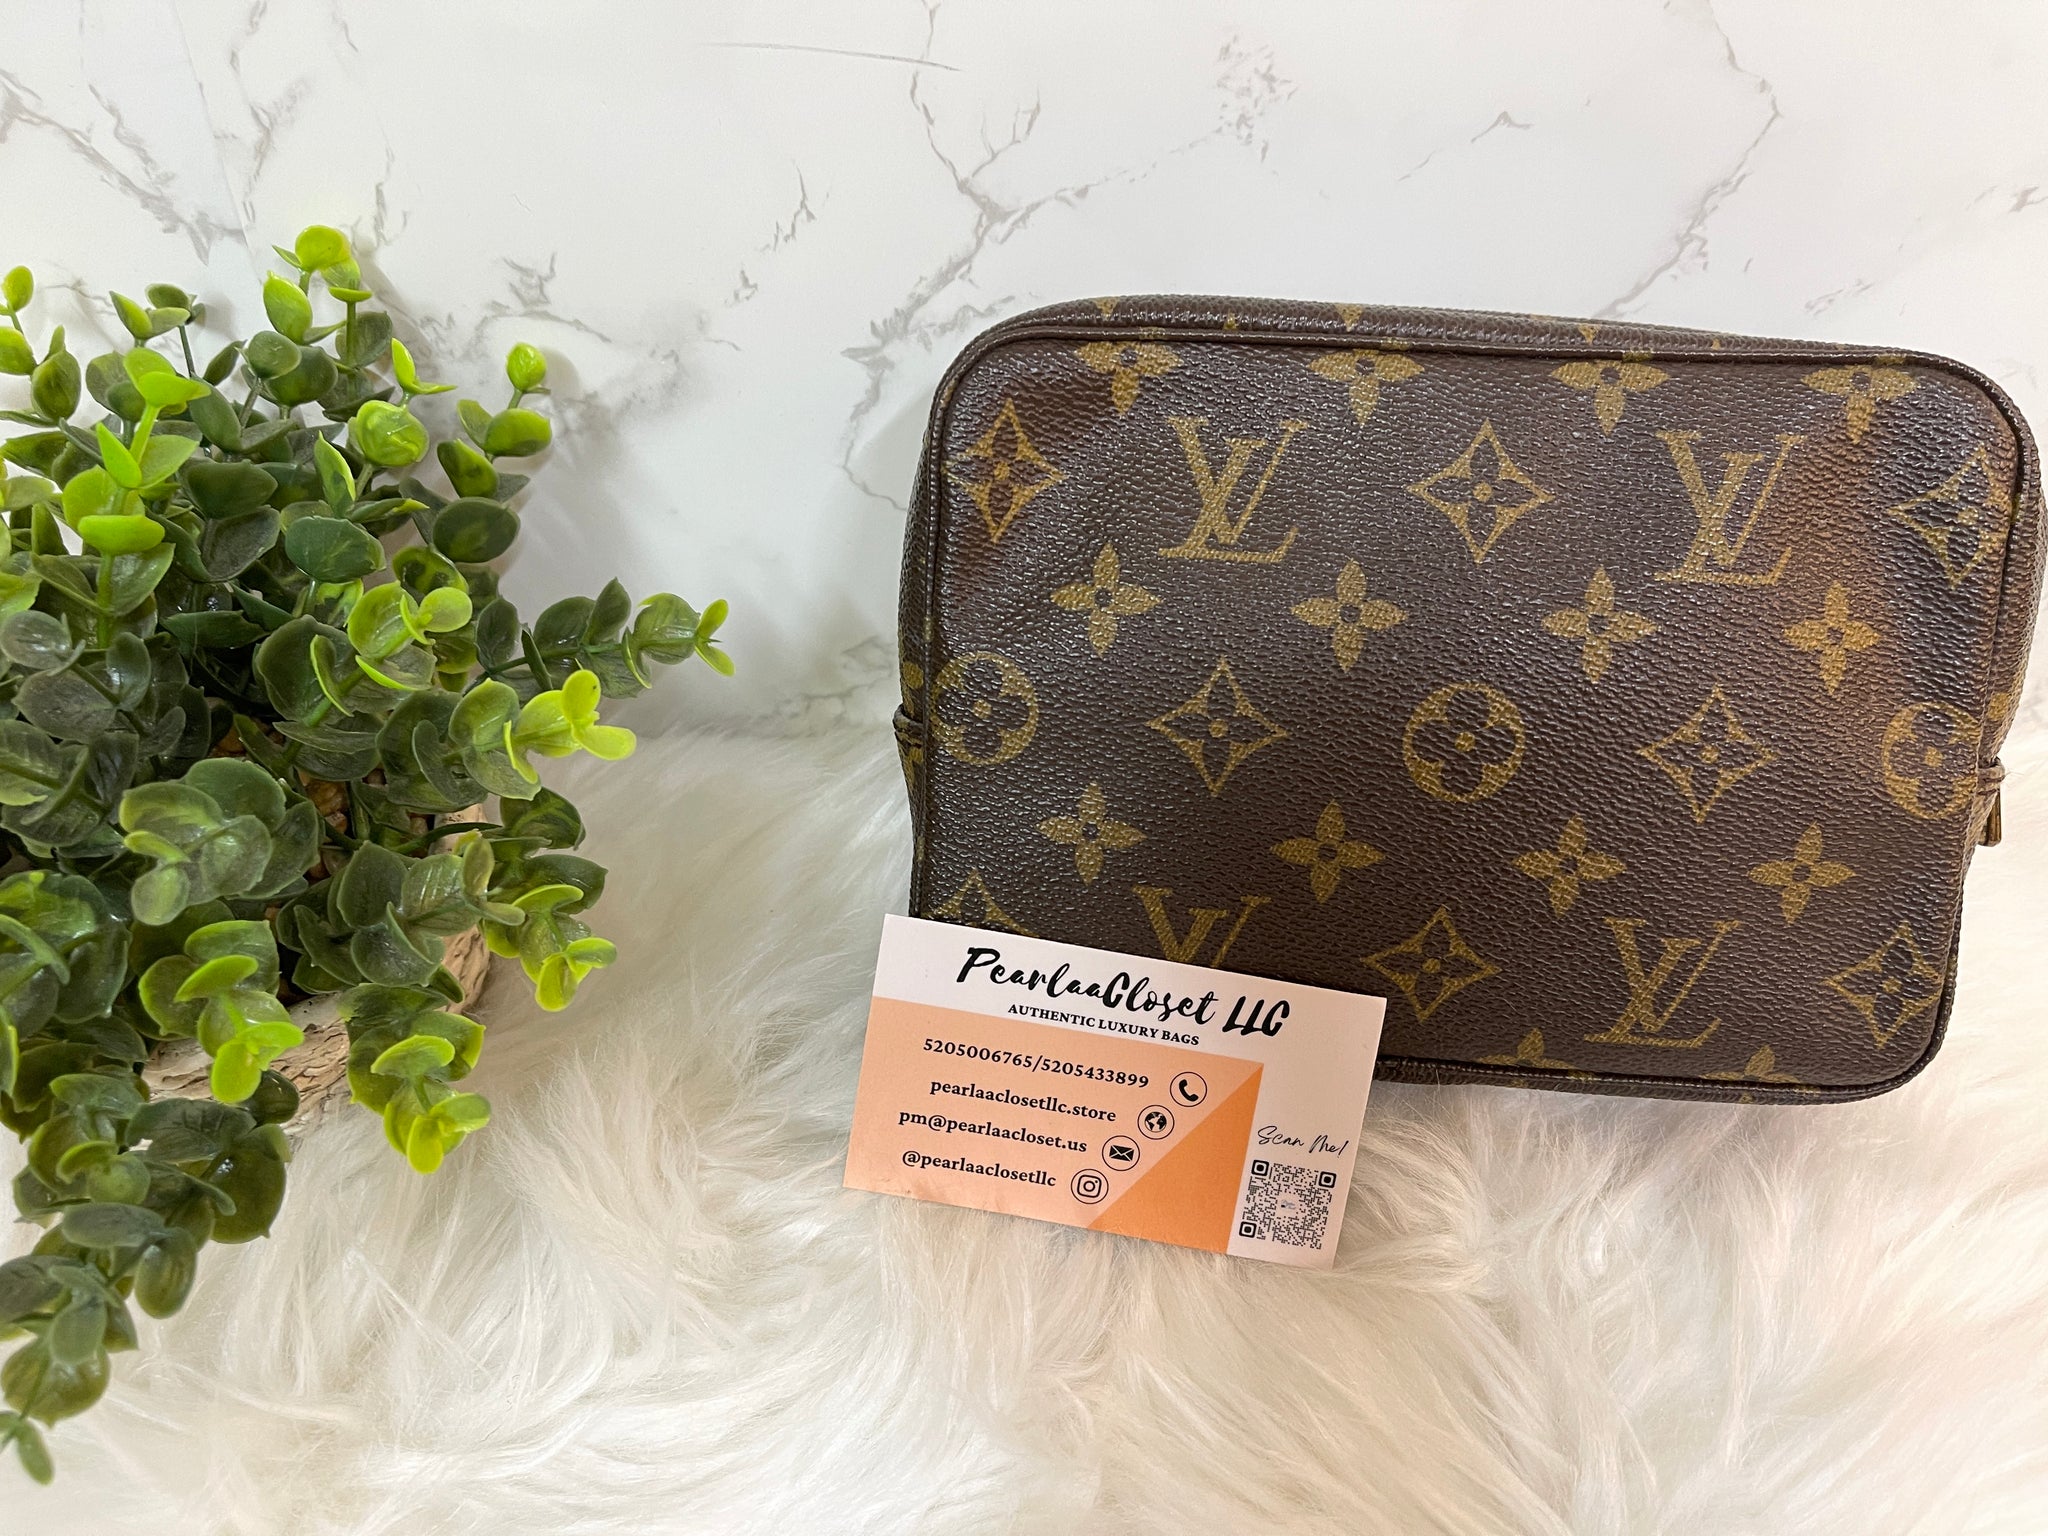 Shop for Louis Vuitton Monogram Canvas Leather Trousse 23 Toiletry MM Pouch  - Shipped from USA